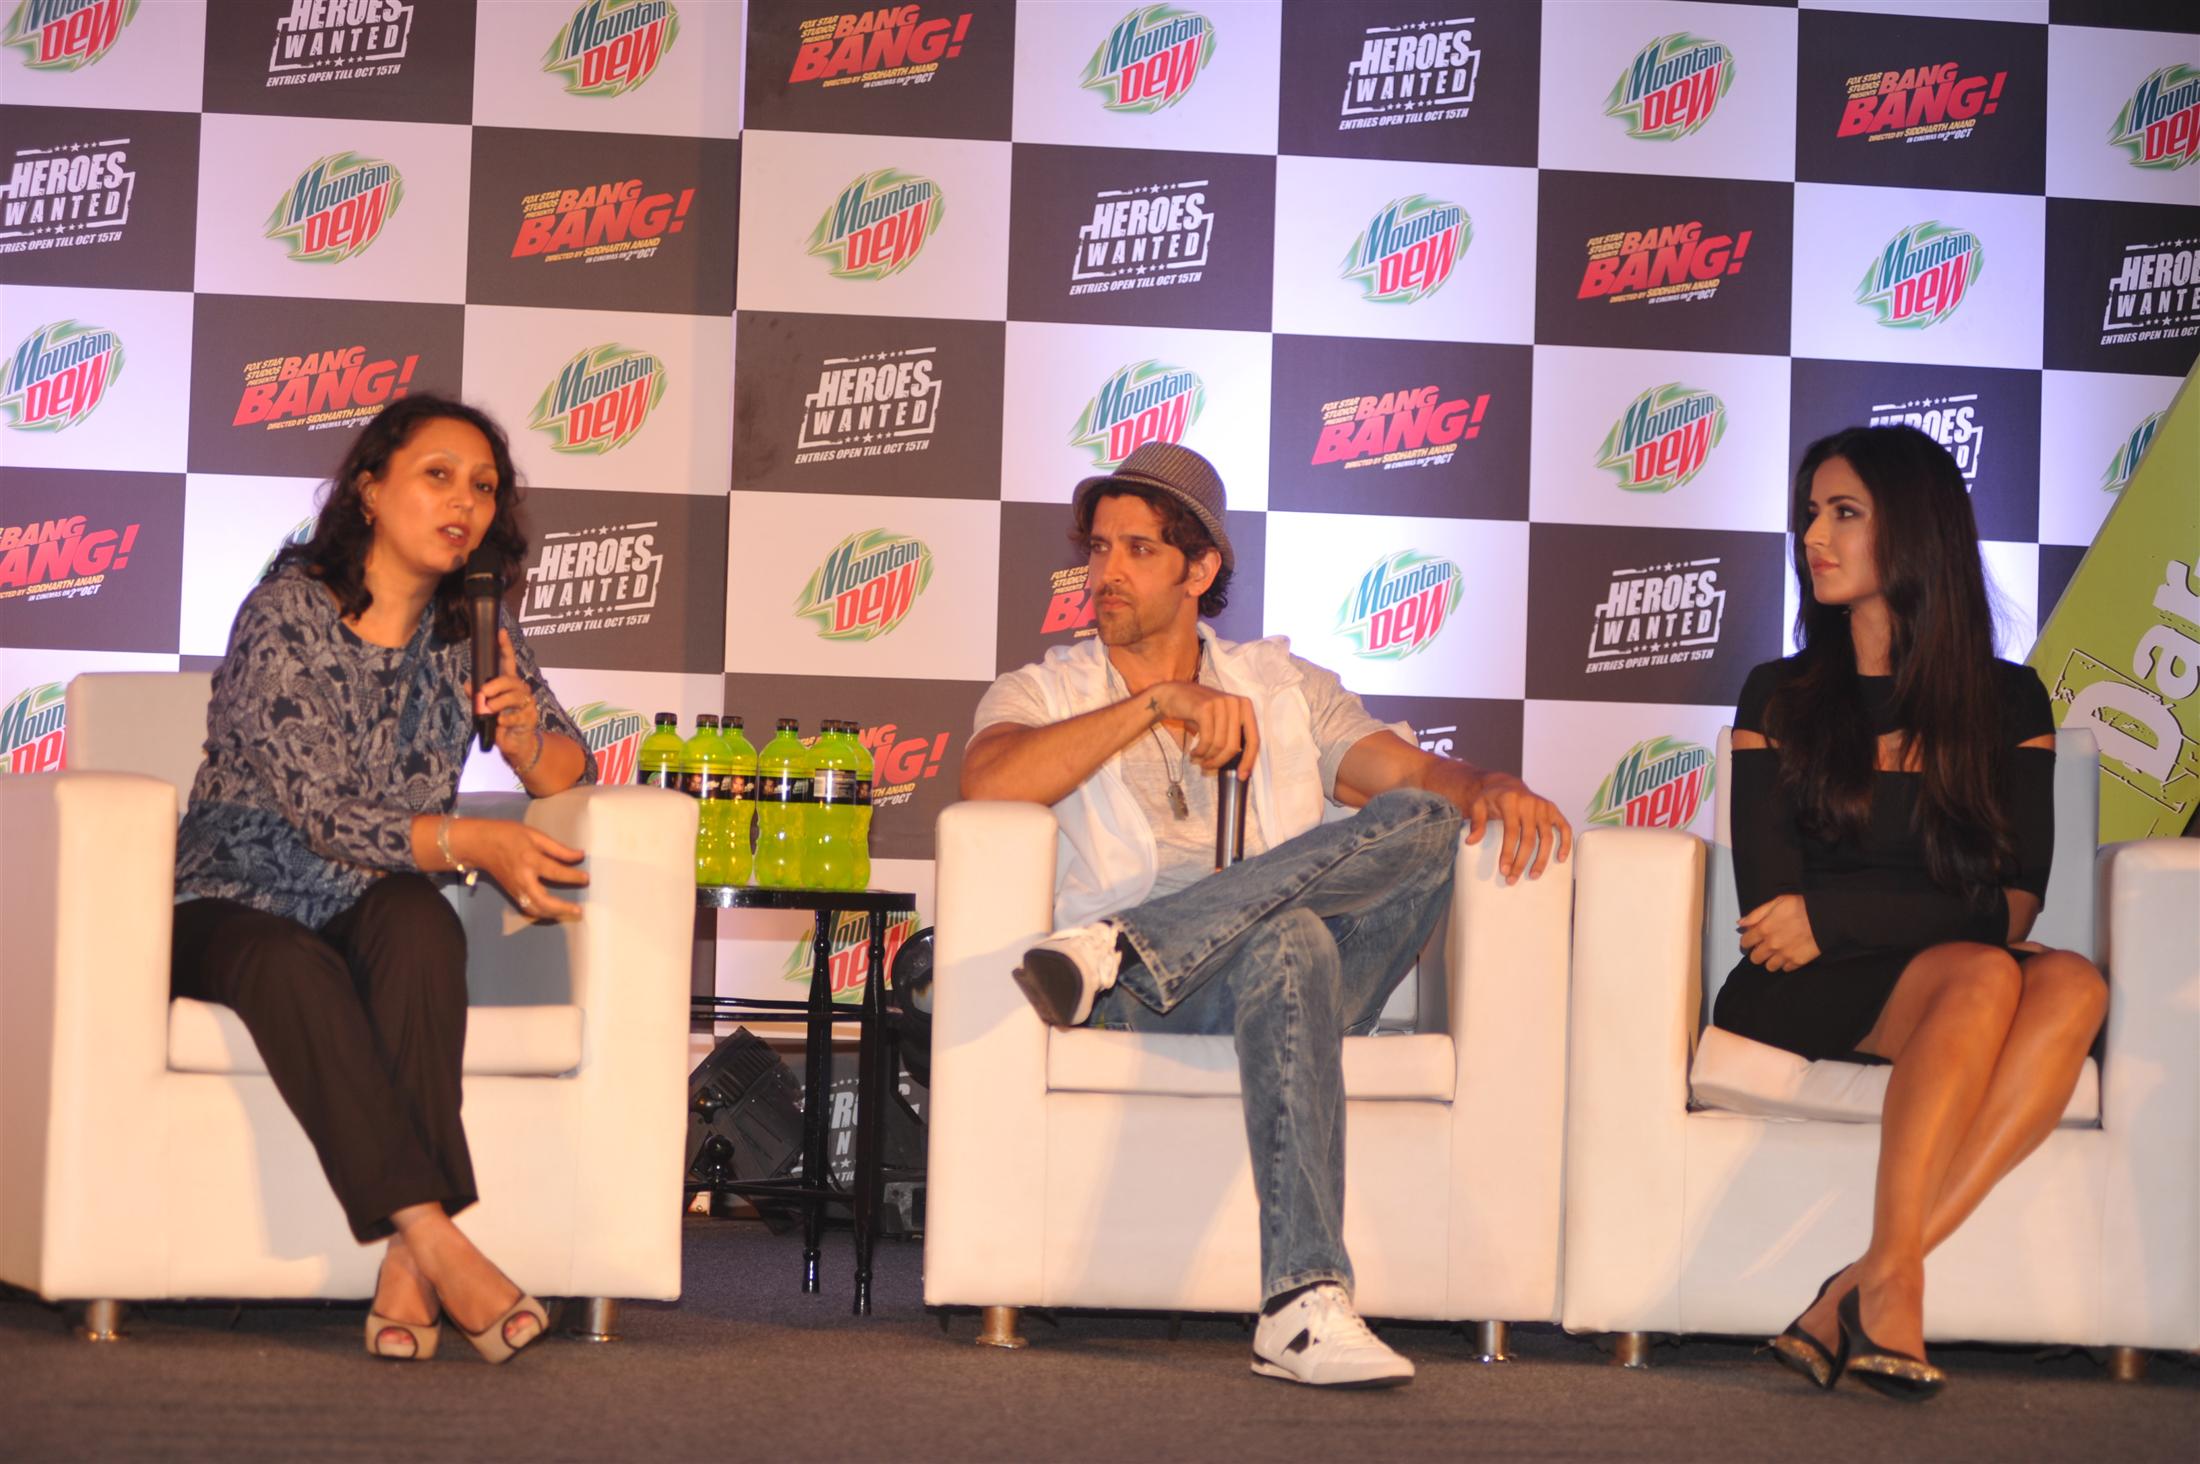 Hrithik and Katrina Launch Mountain Dew Heroes Wanted Campaign